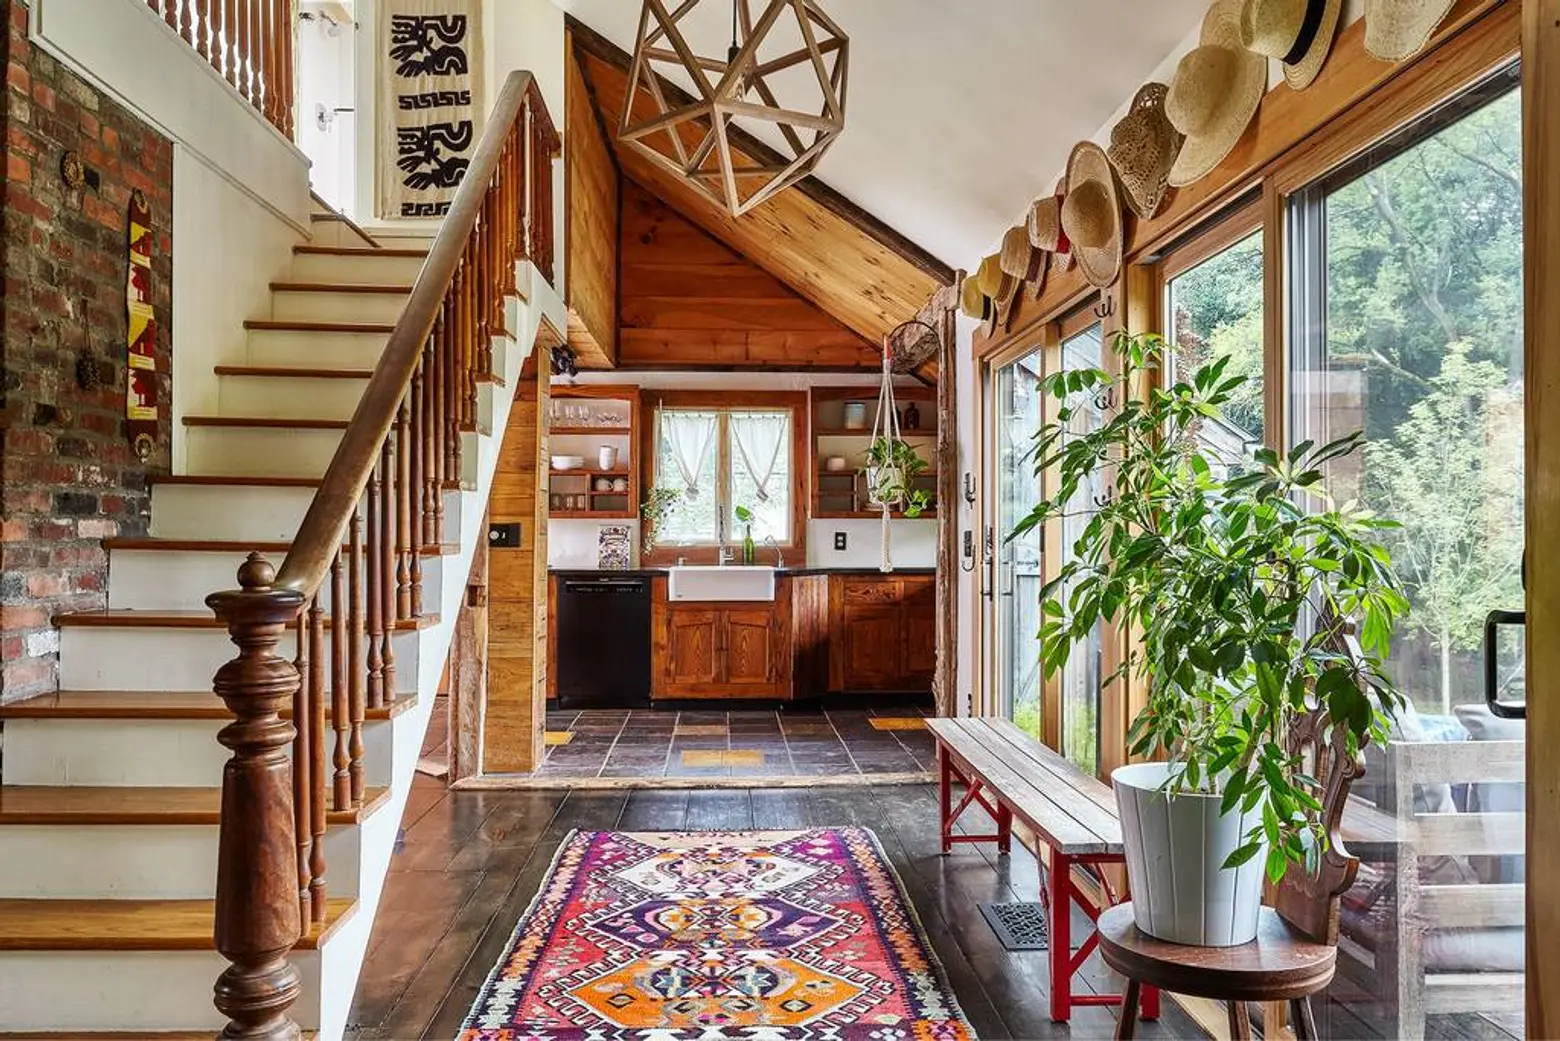 Spend a winter weekend in this boho-chic Hudson Valley cabin for $200/night